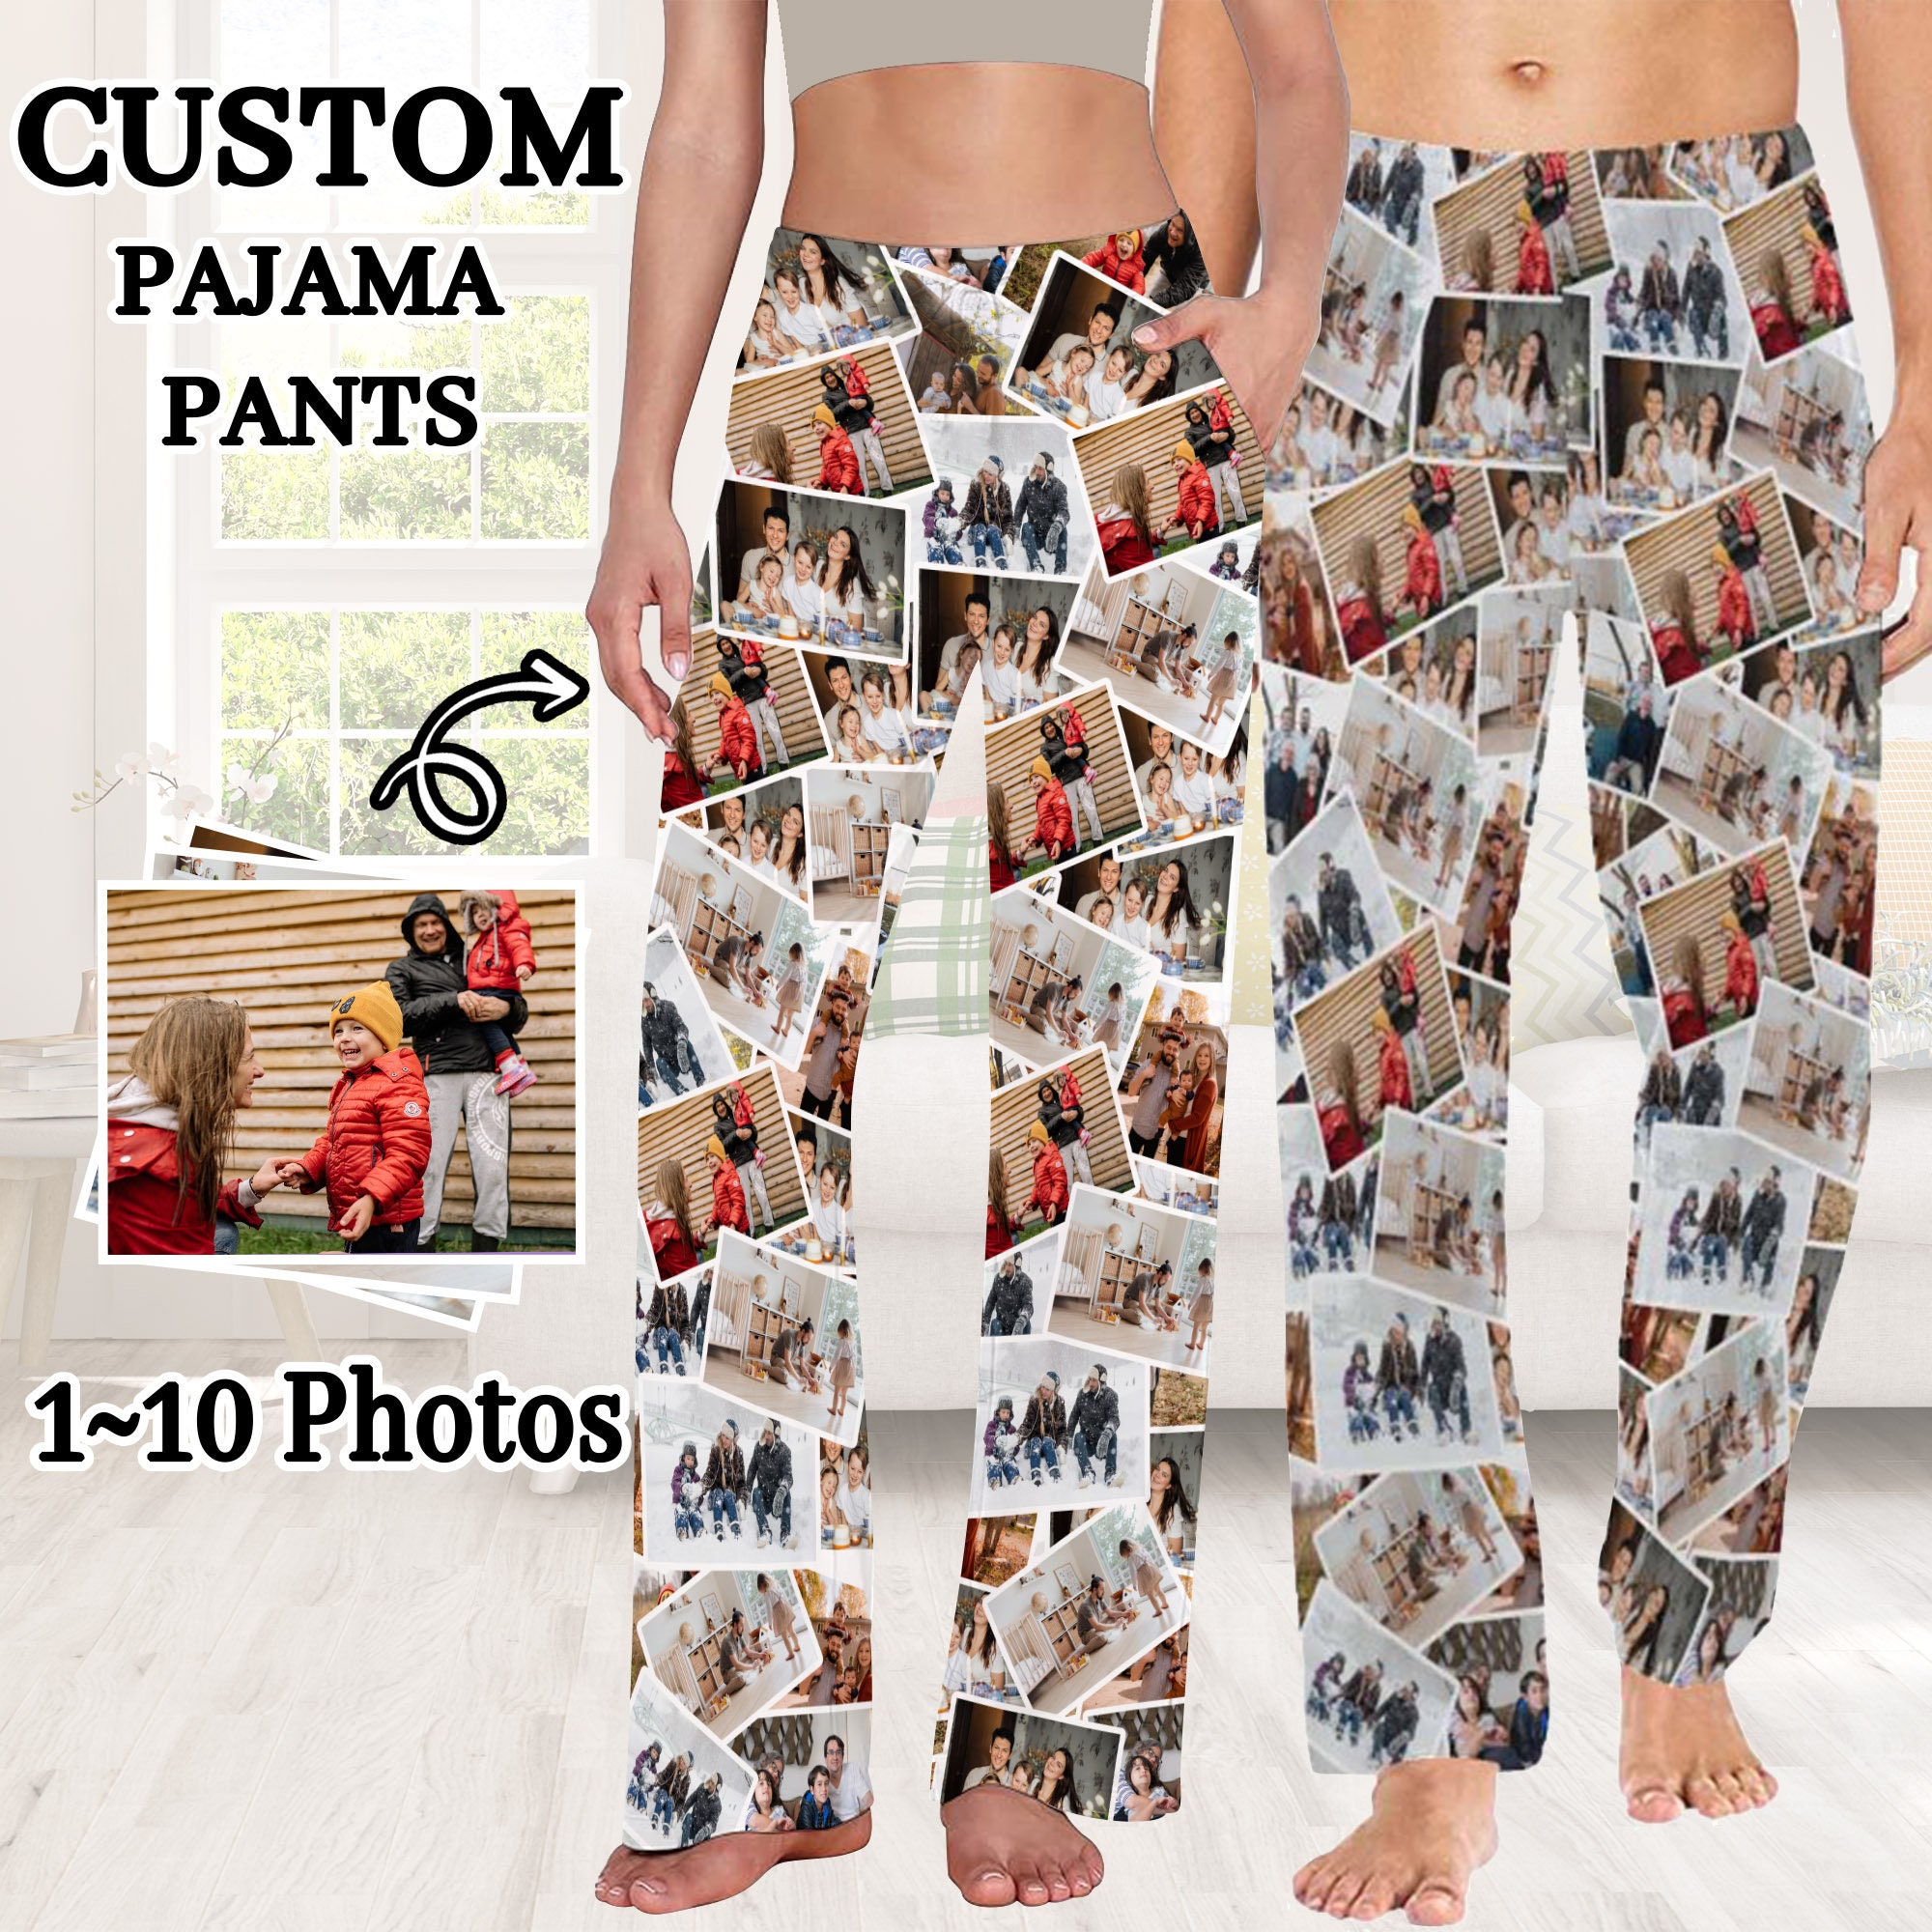 Customized Pajama Pants With Photo,collage Photo Pants,pictures Printed  Pajama,men's Pajama Bottoms,gift for Him,birthday Day Gift20pictures 